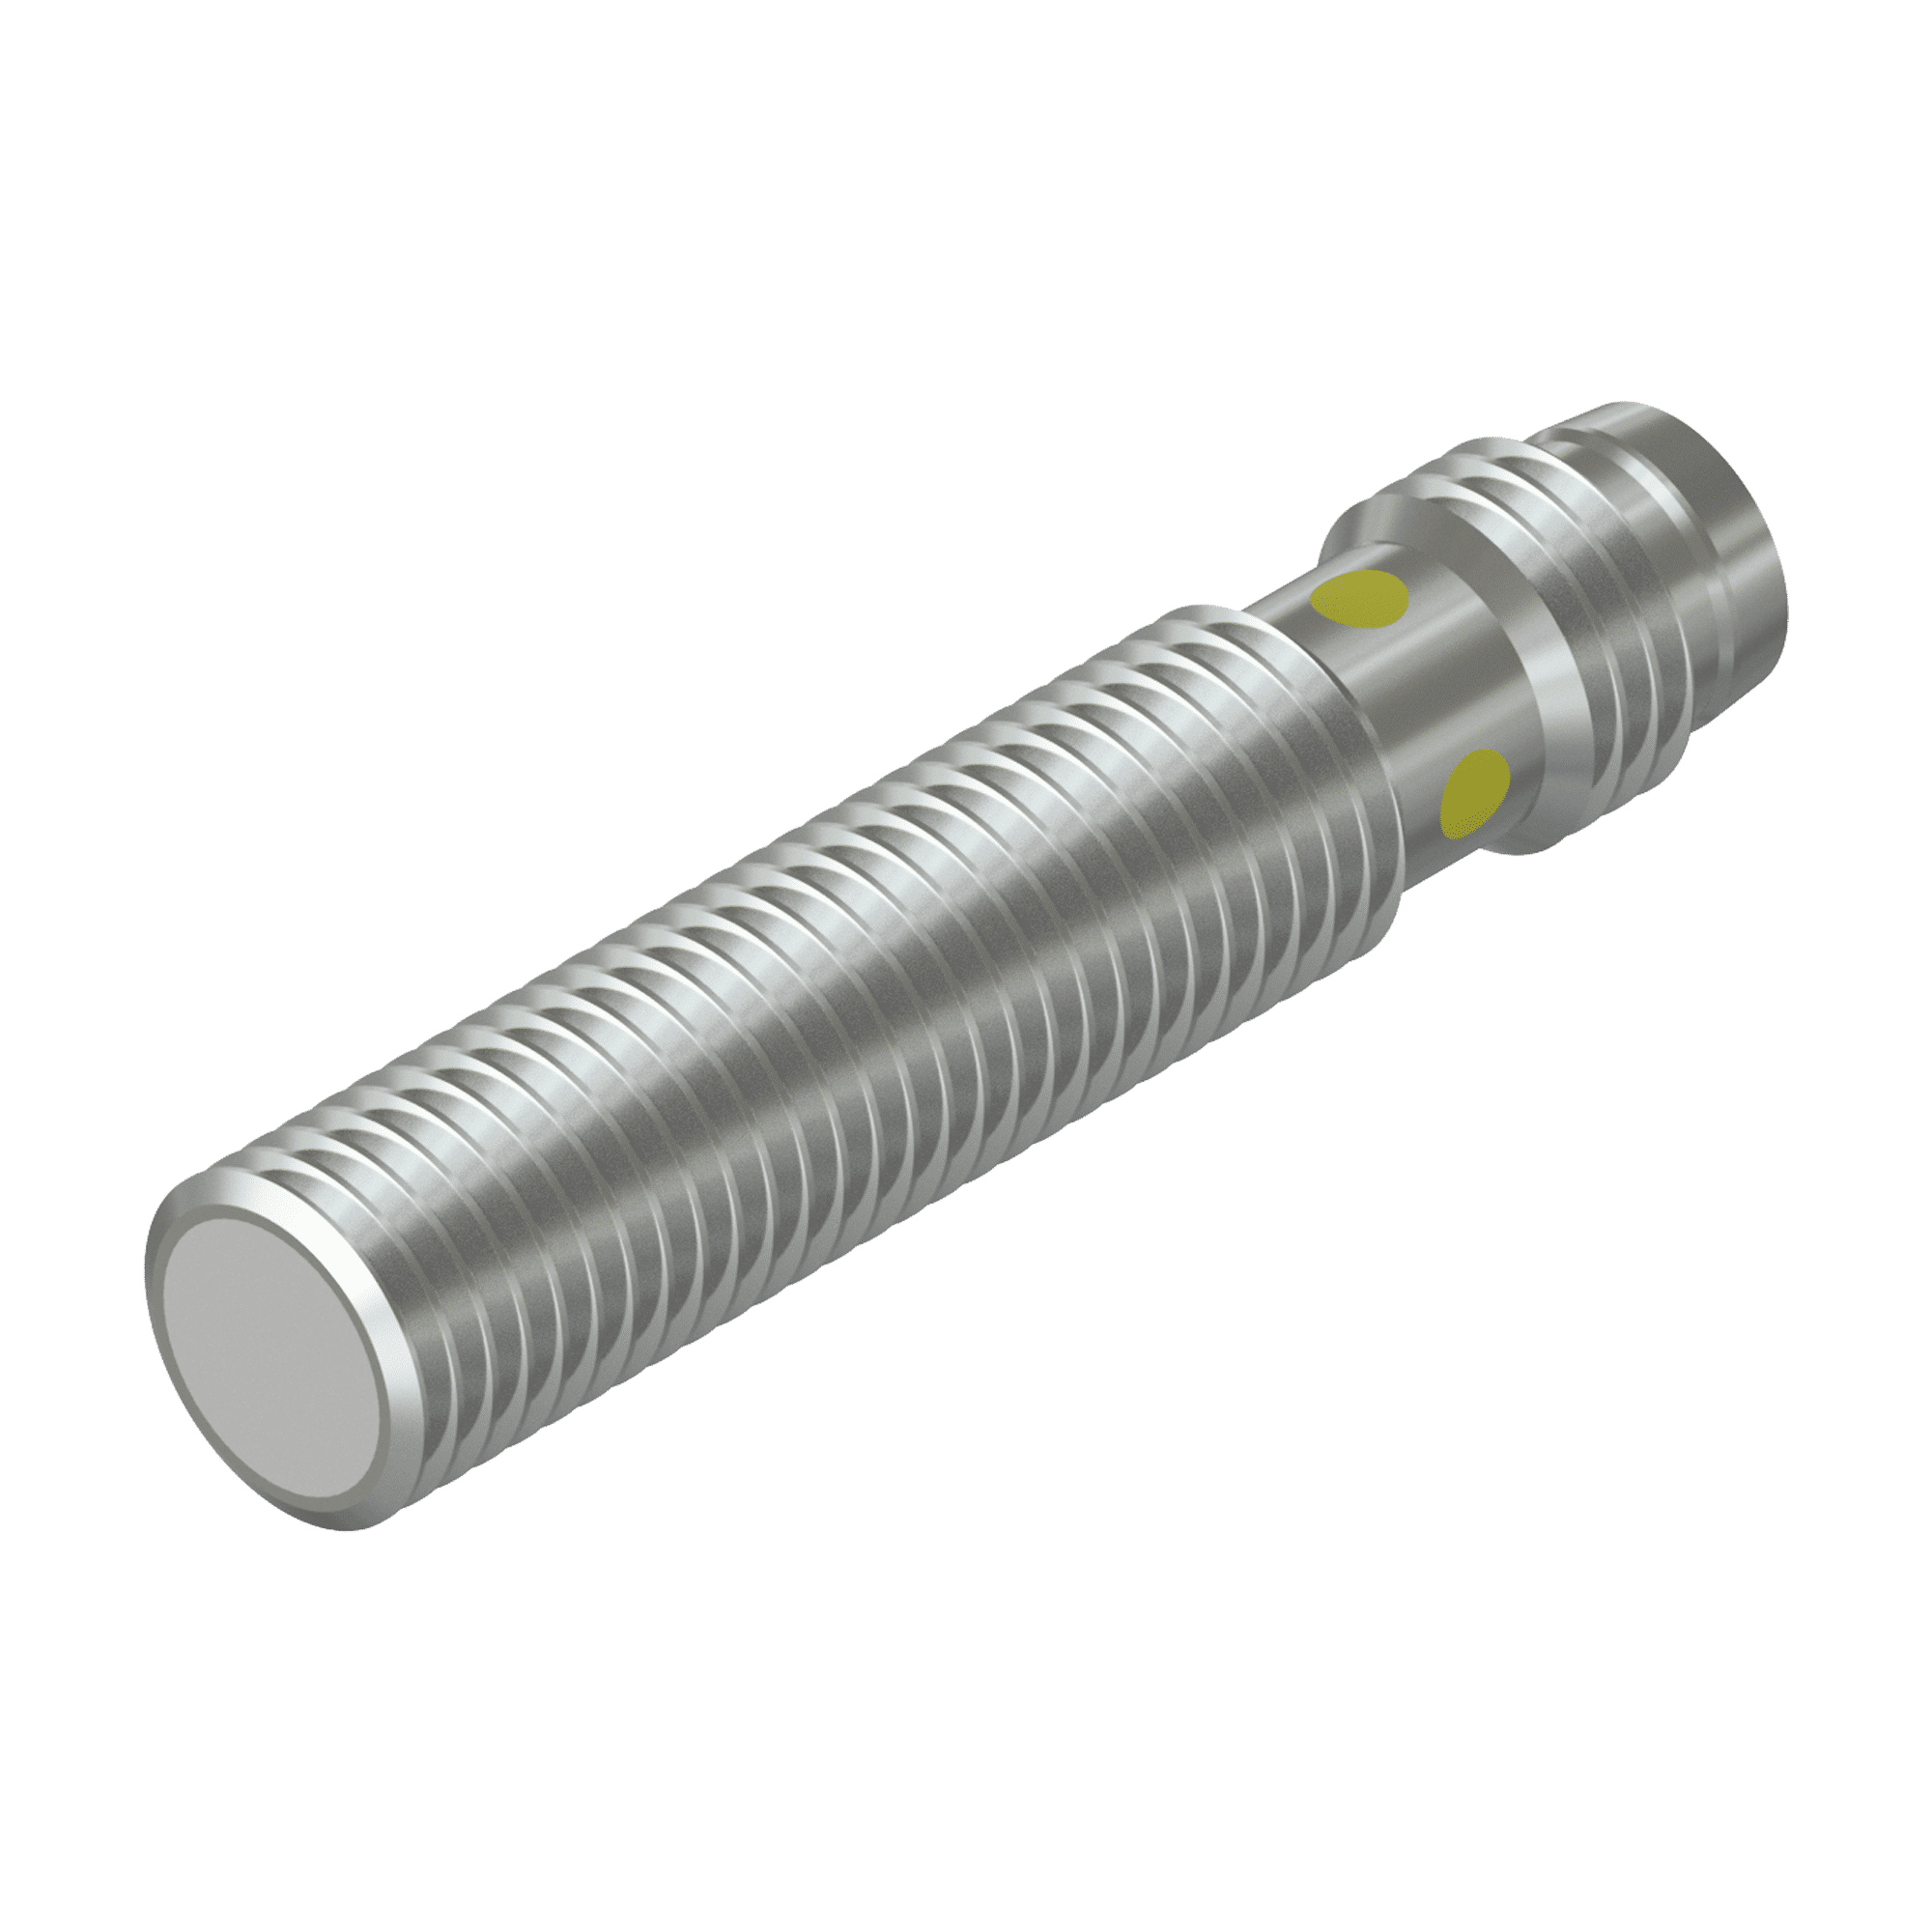 Inductive round sensor M8 Length 30mm M8 male connector connection